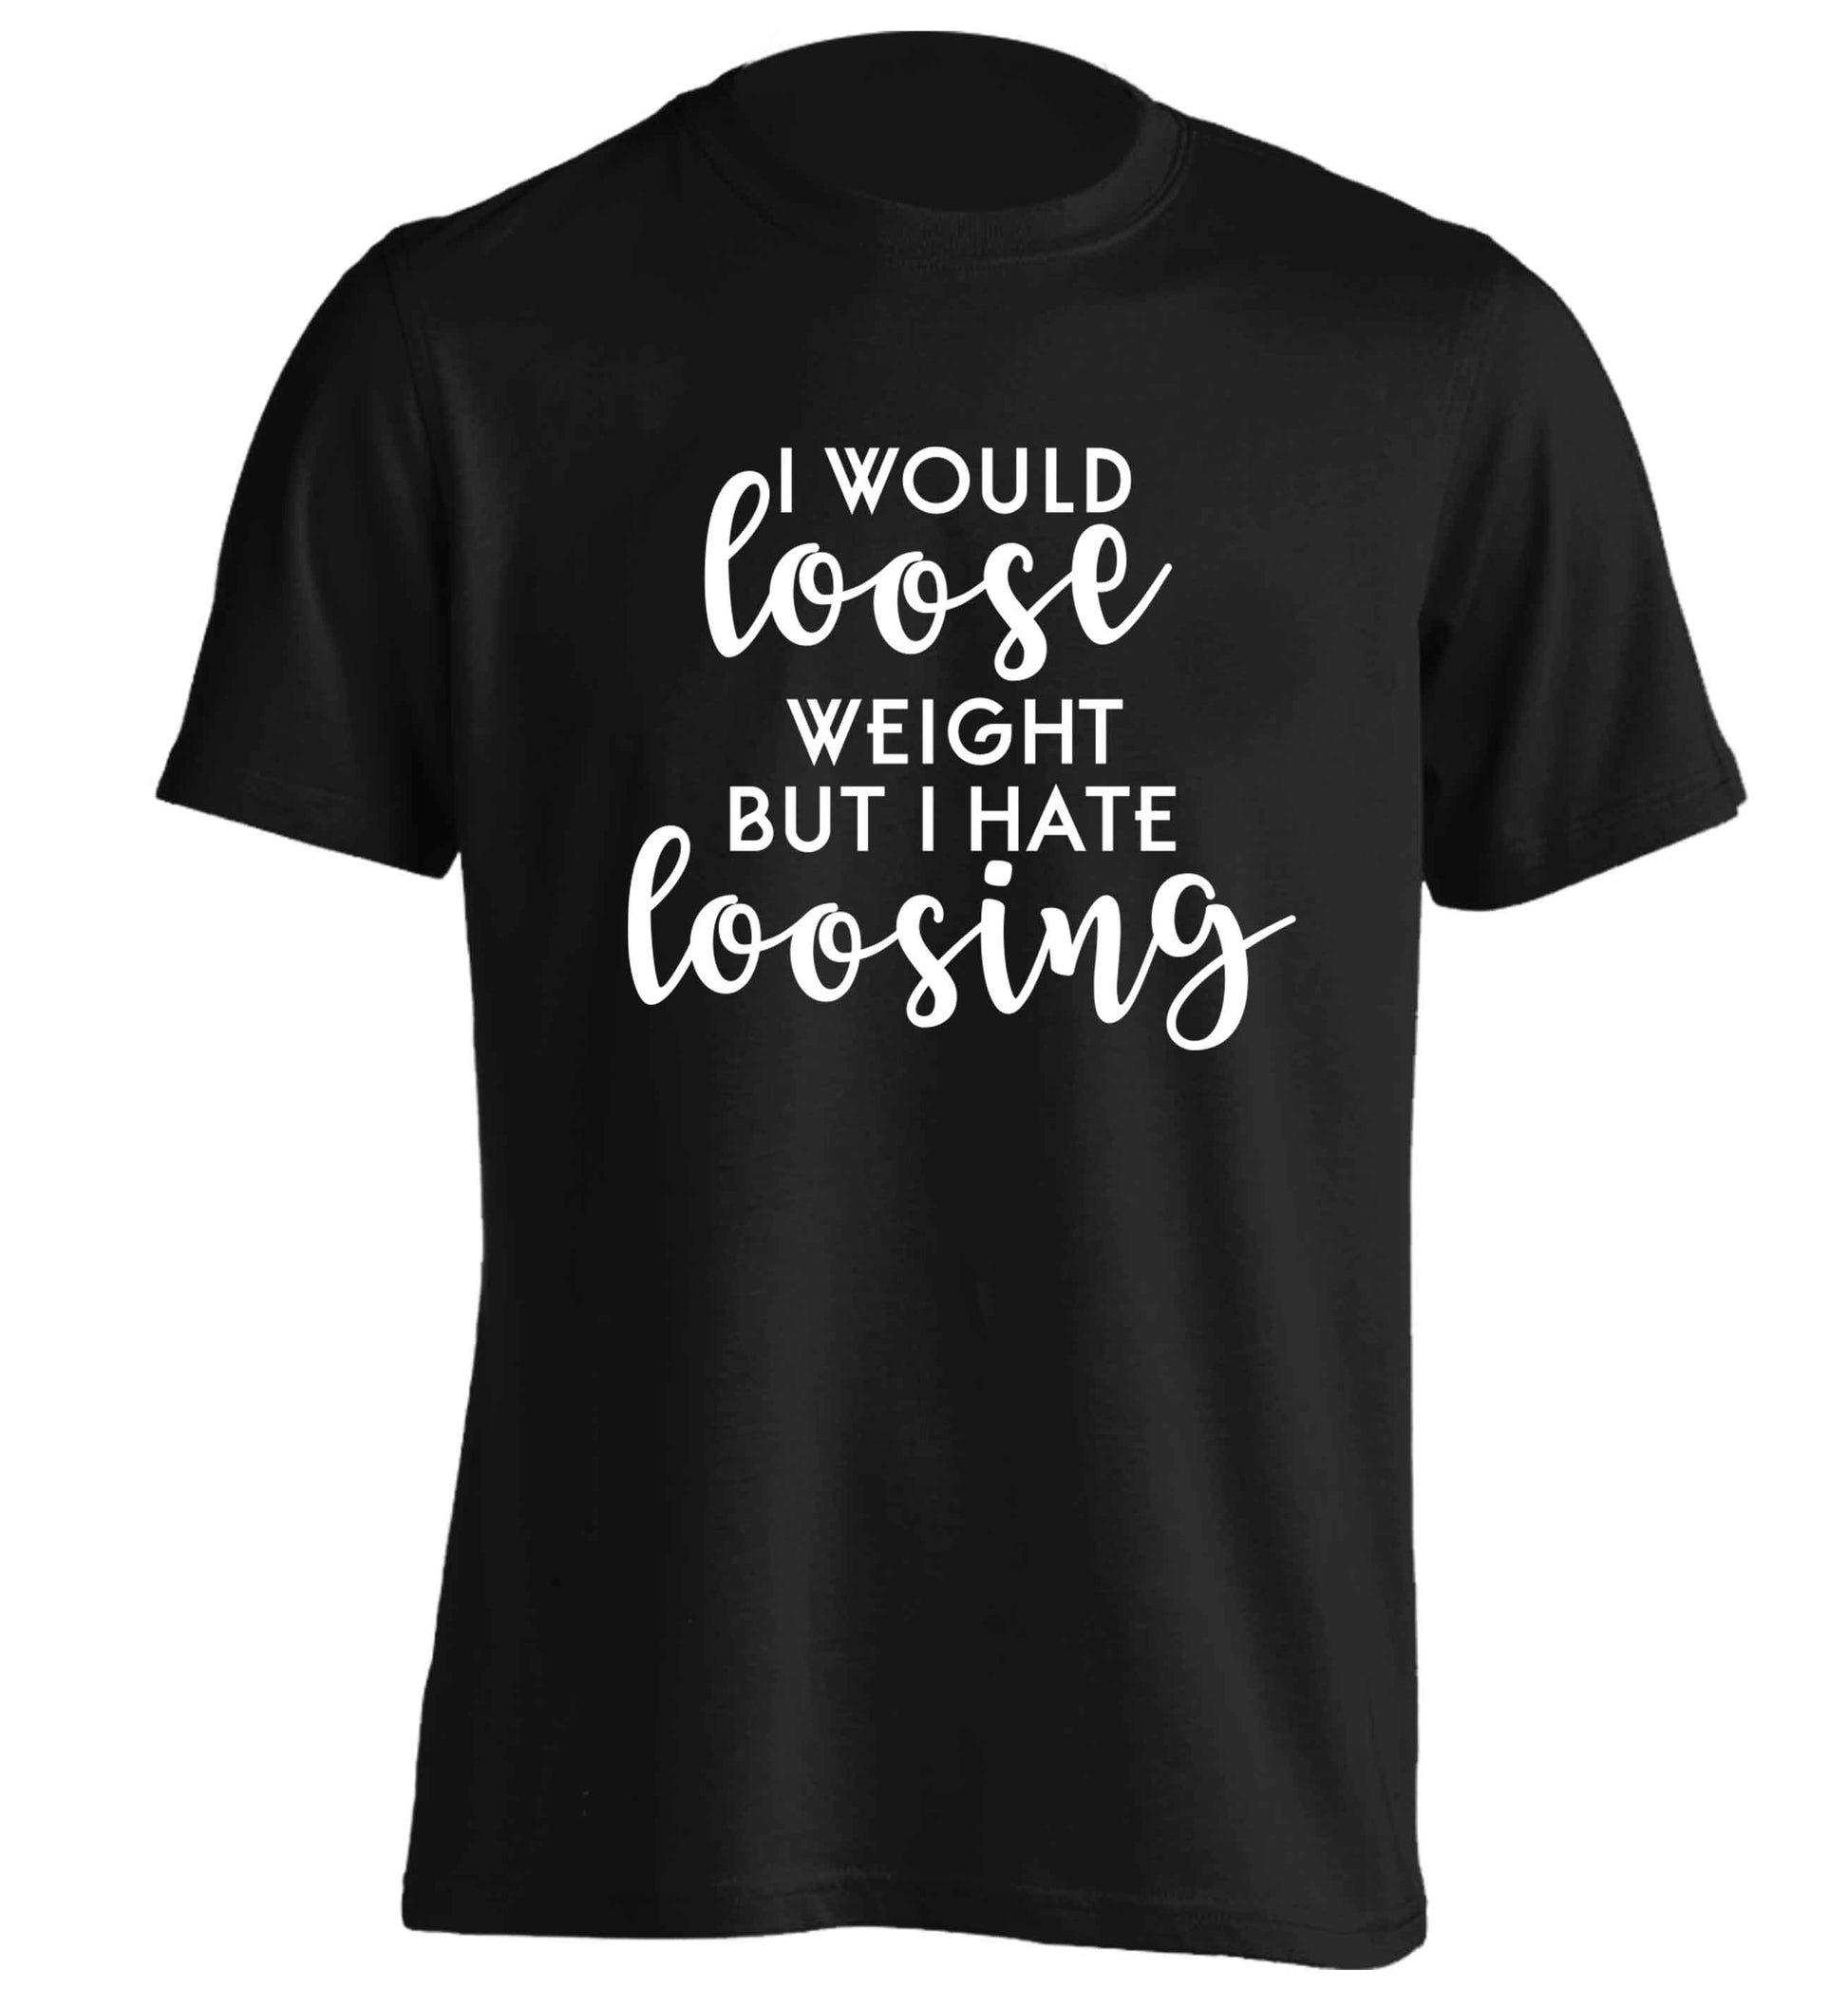 I would loose weight but I hate loosing adults unisex black Tshirt 2XL